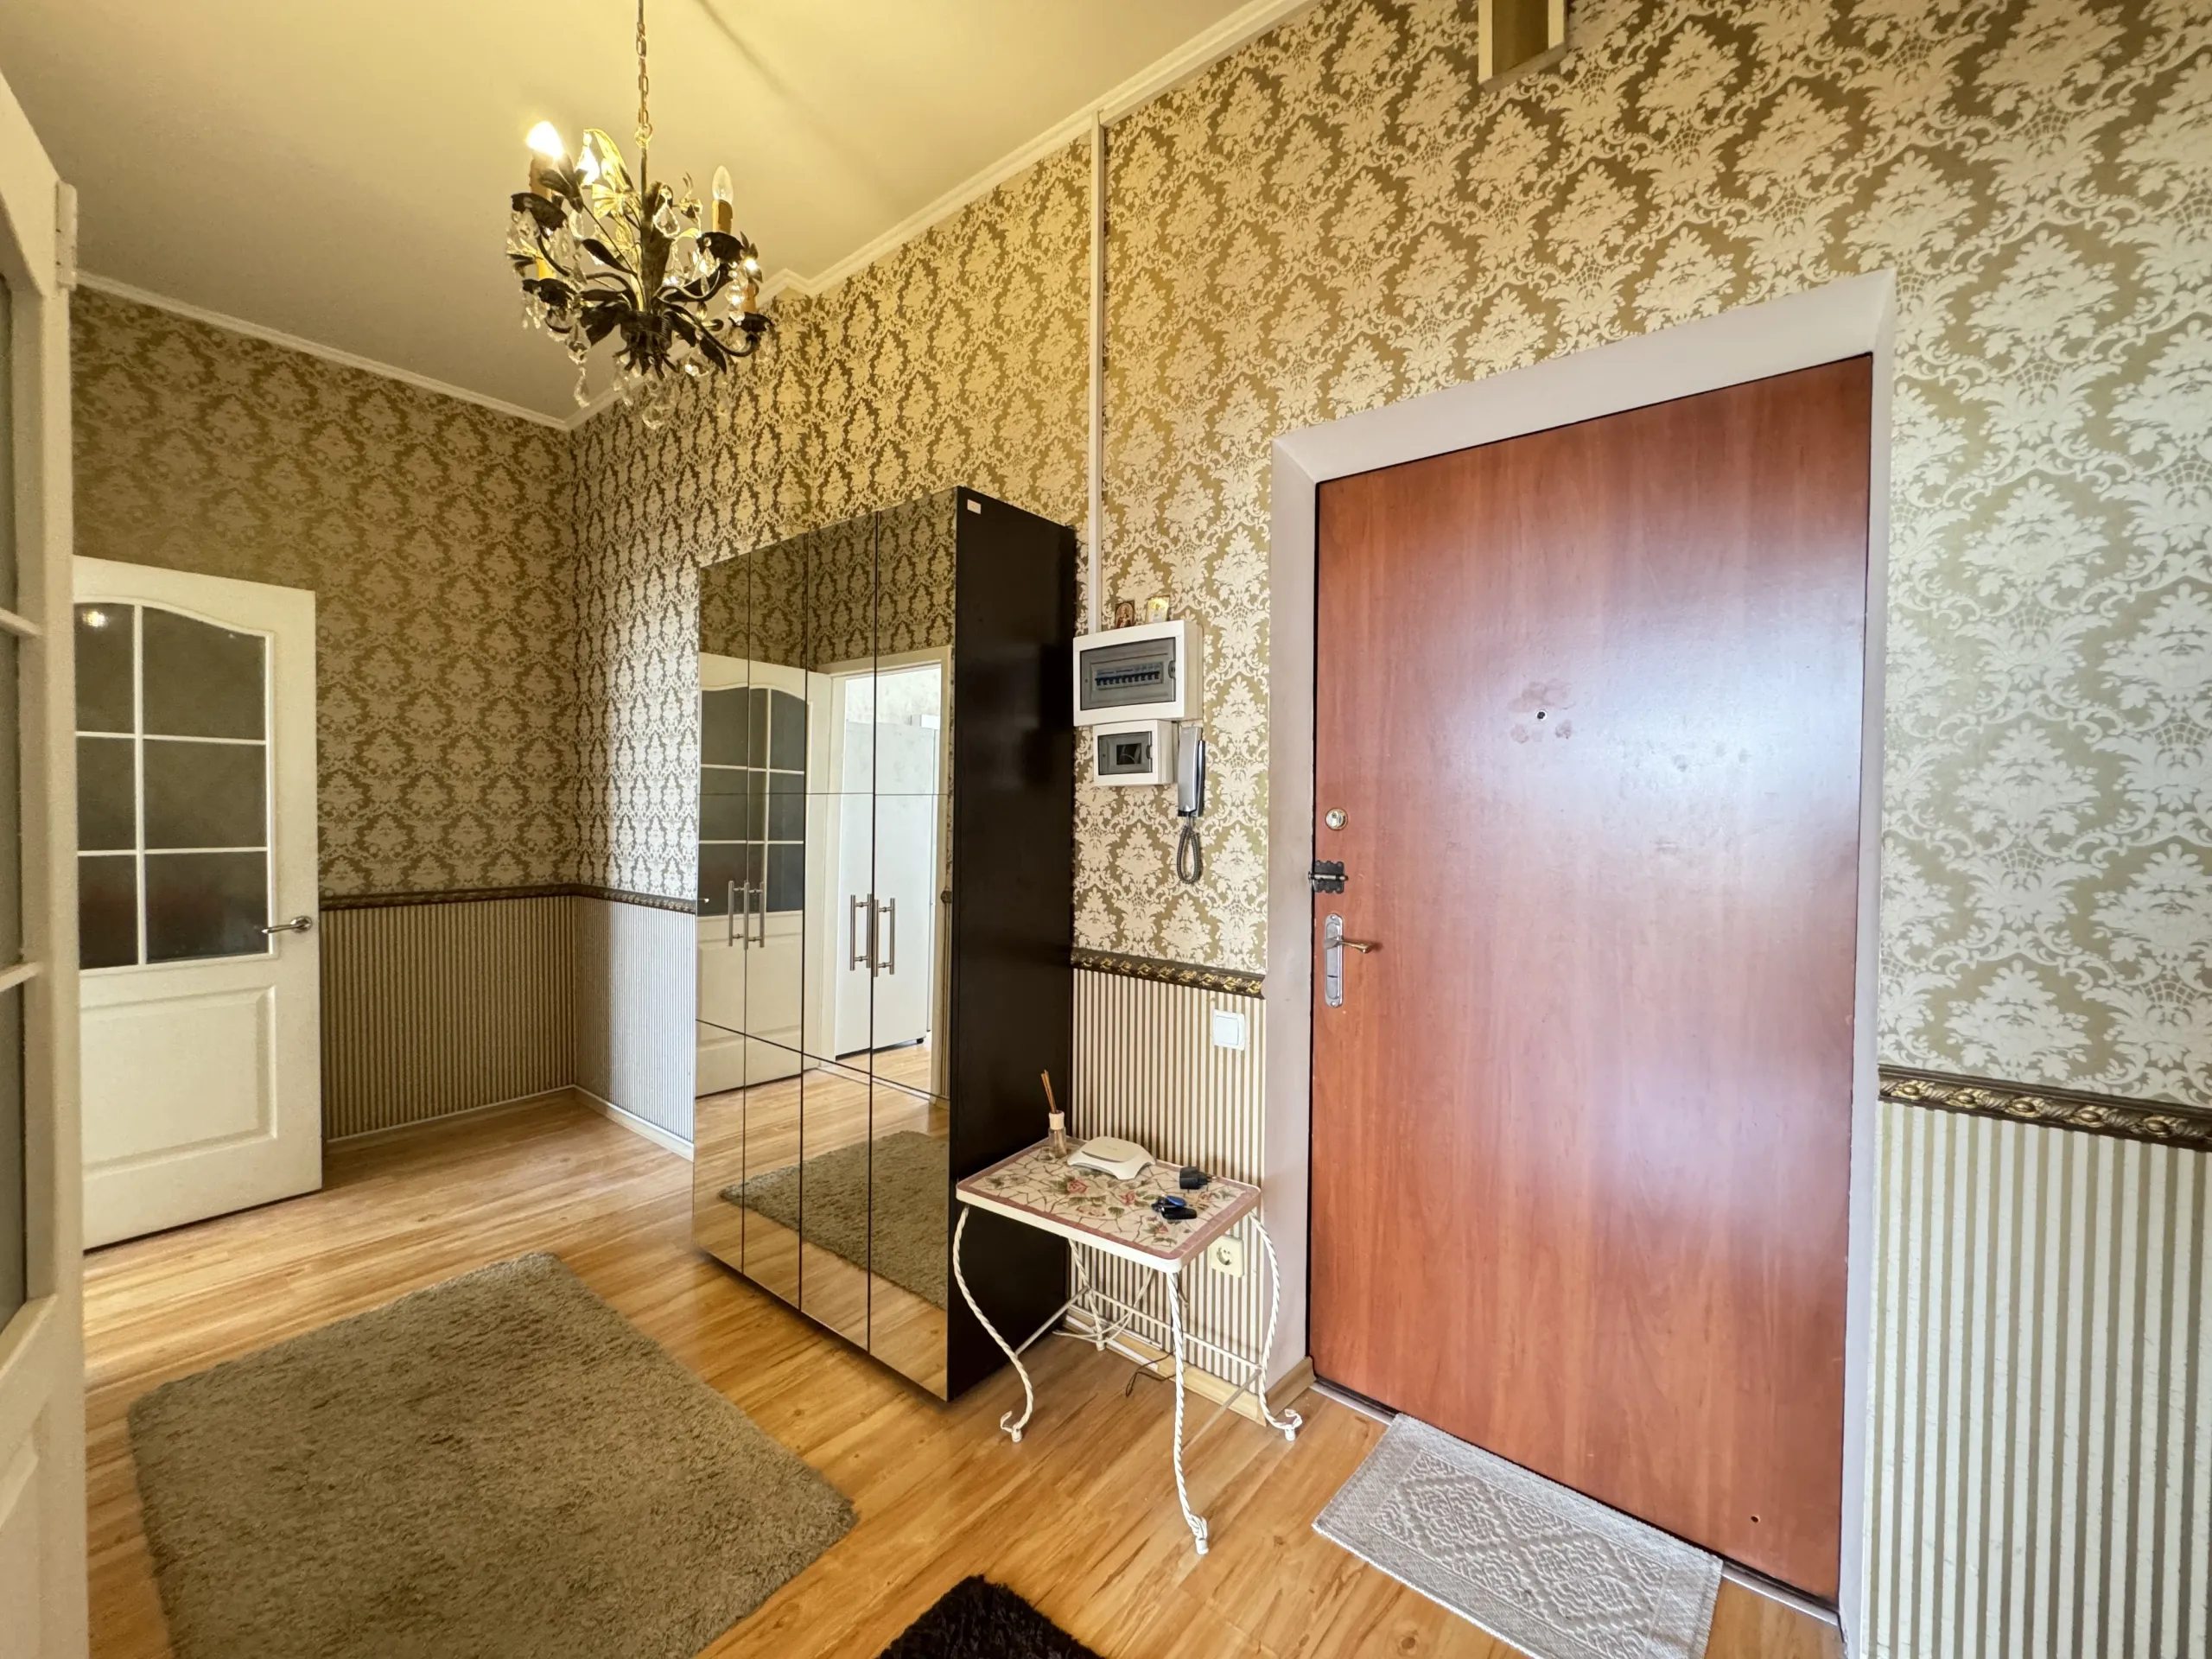 For sale magnificent two-room apartment in the historical center